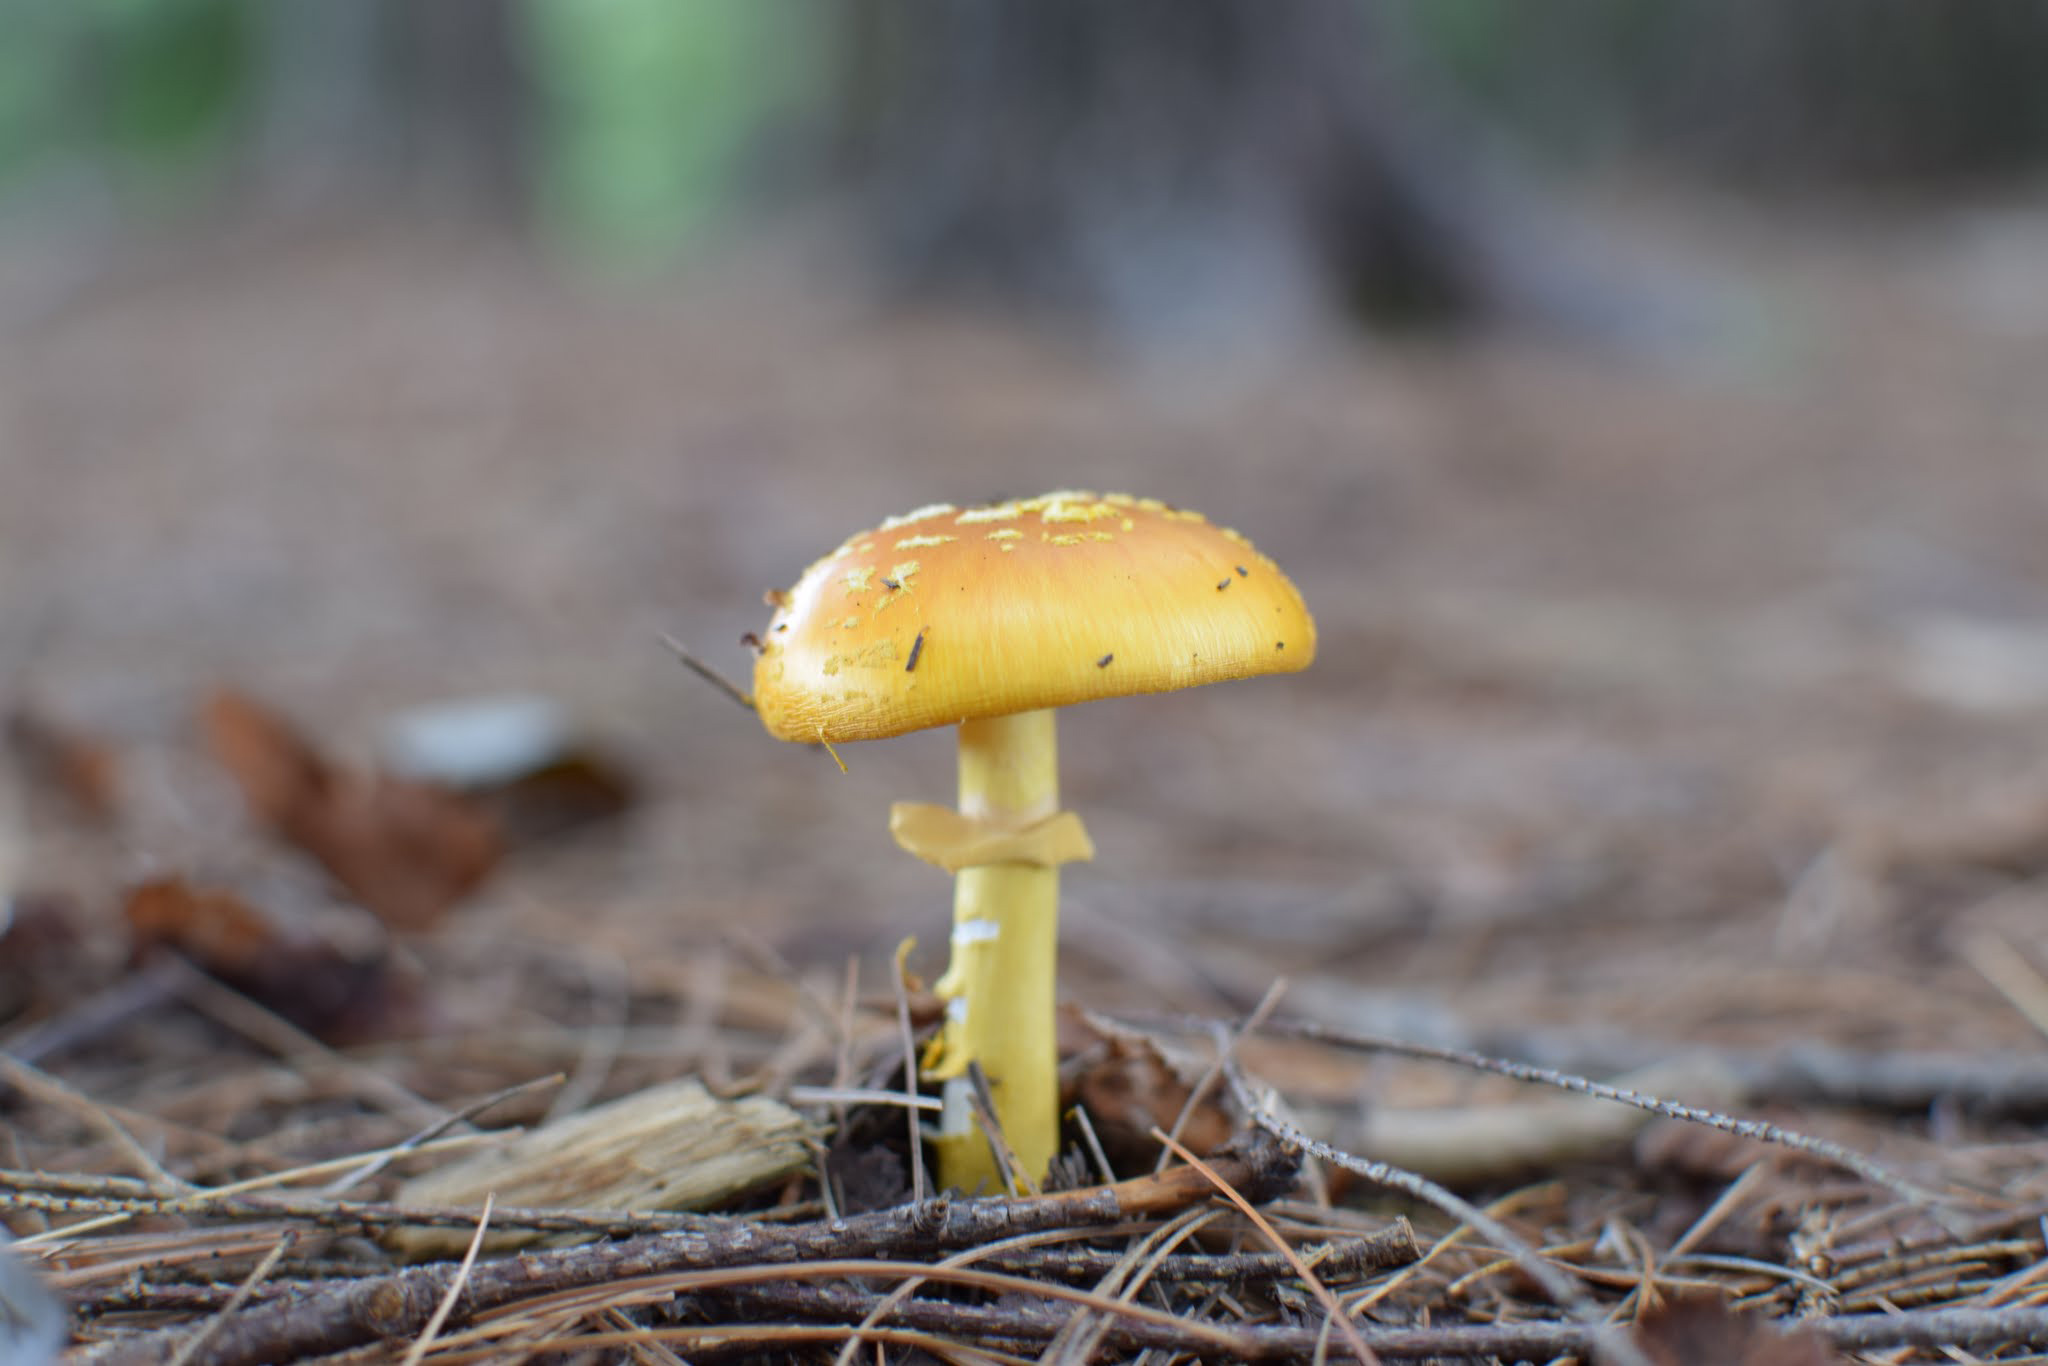 A yellow mushroom growing on the forest floor, surrounded by pine needles. (photo © Jill Griffiths)